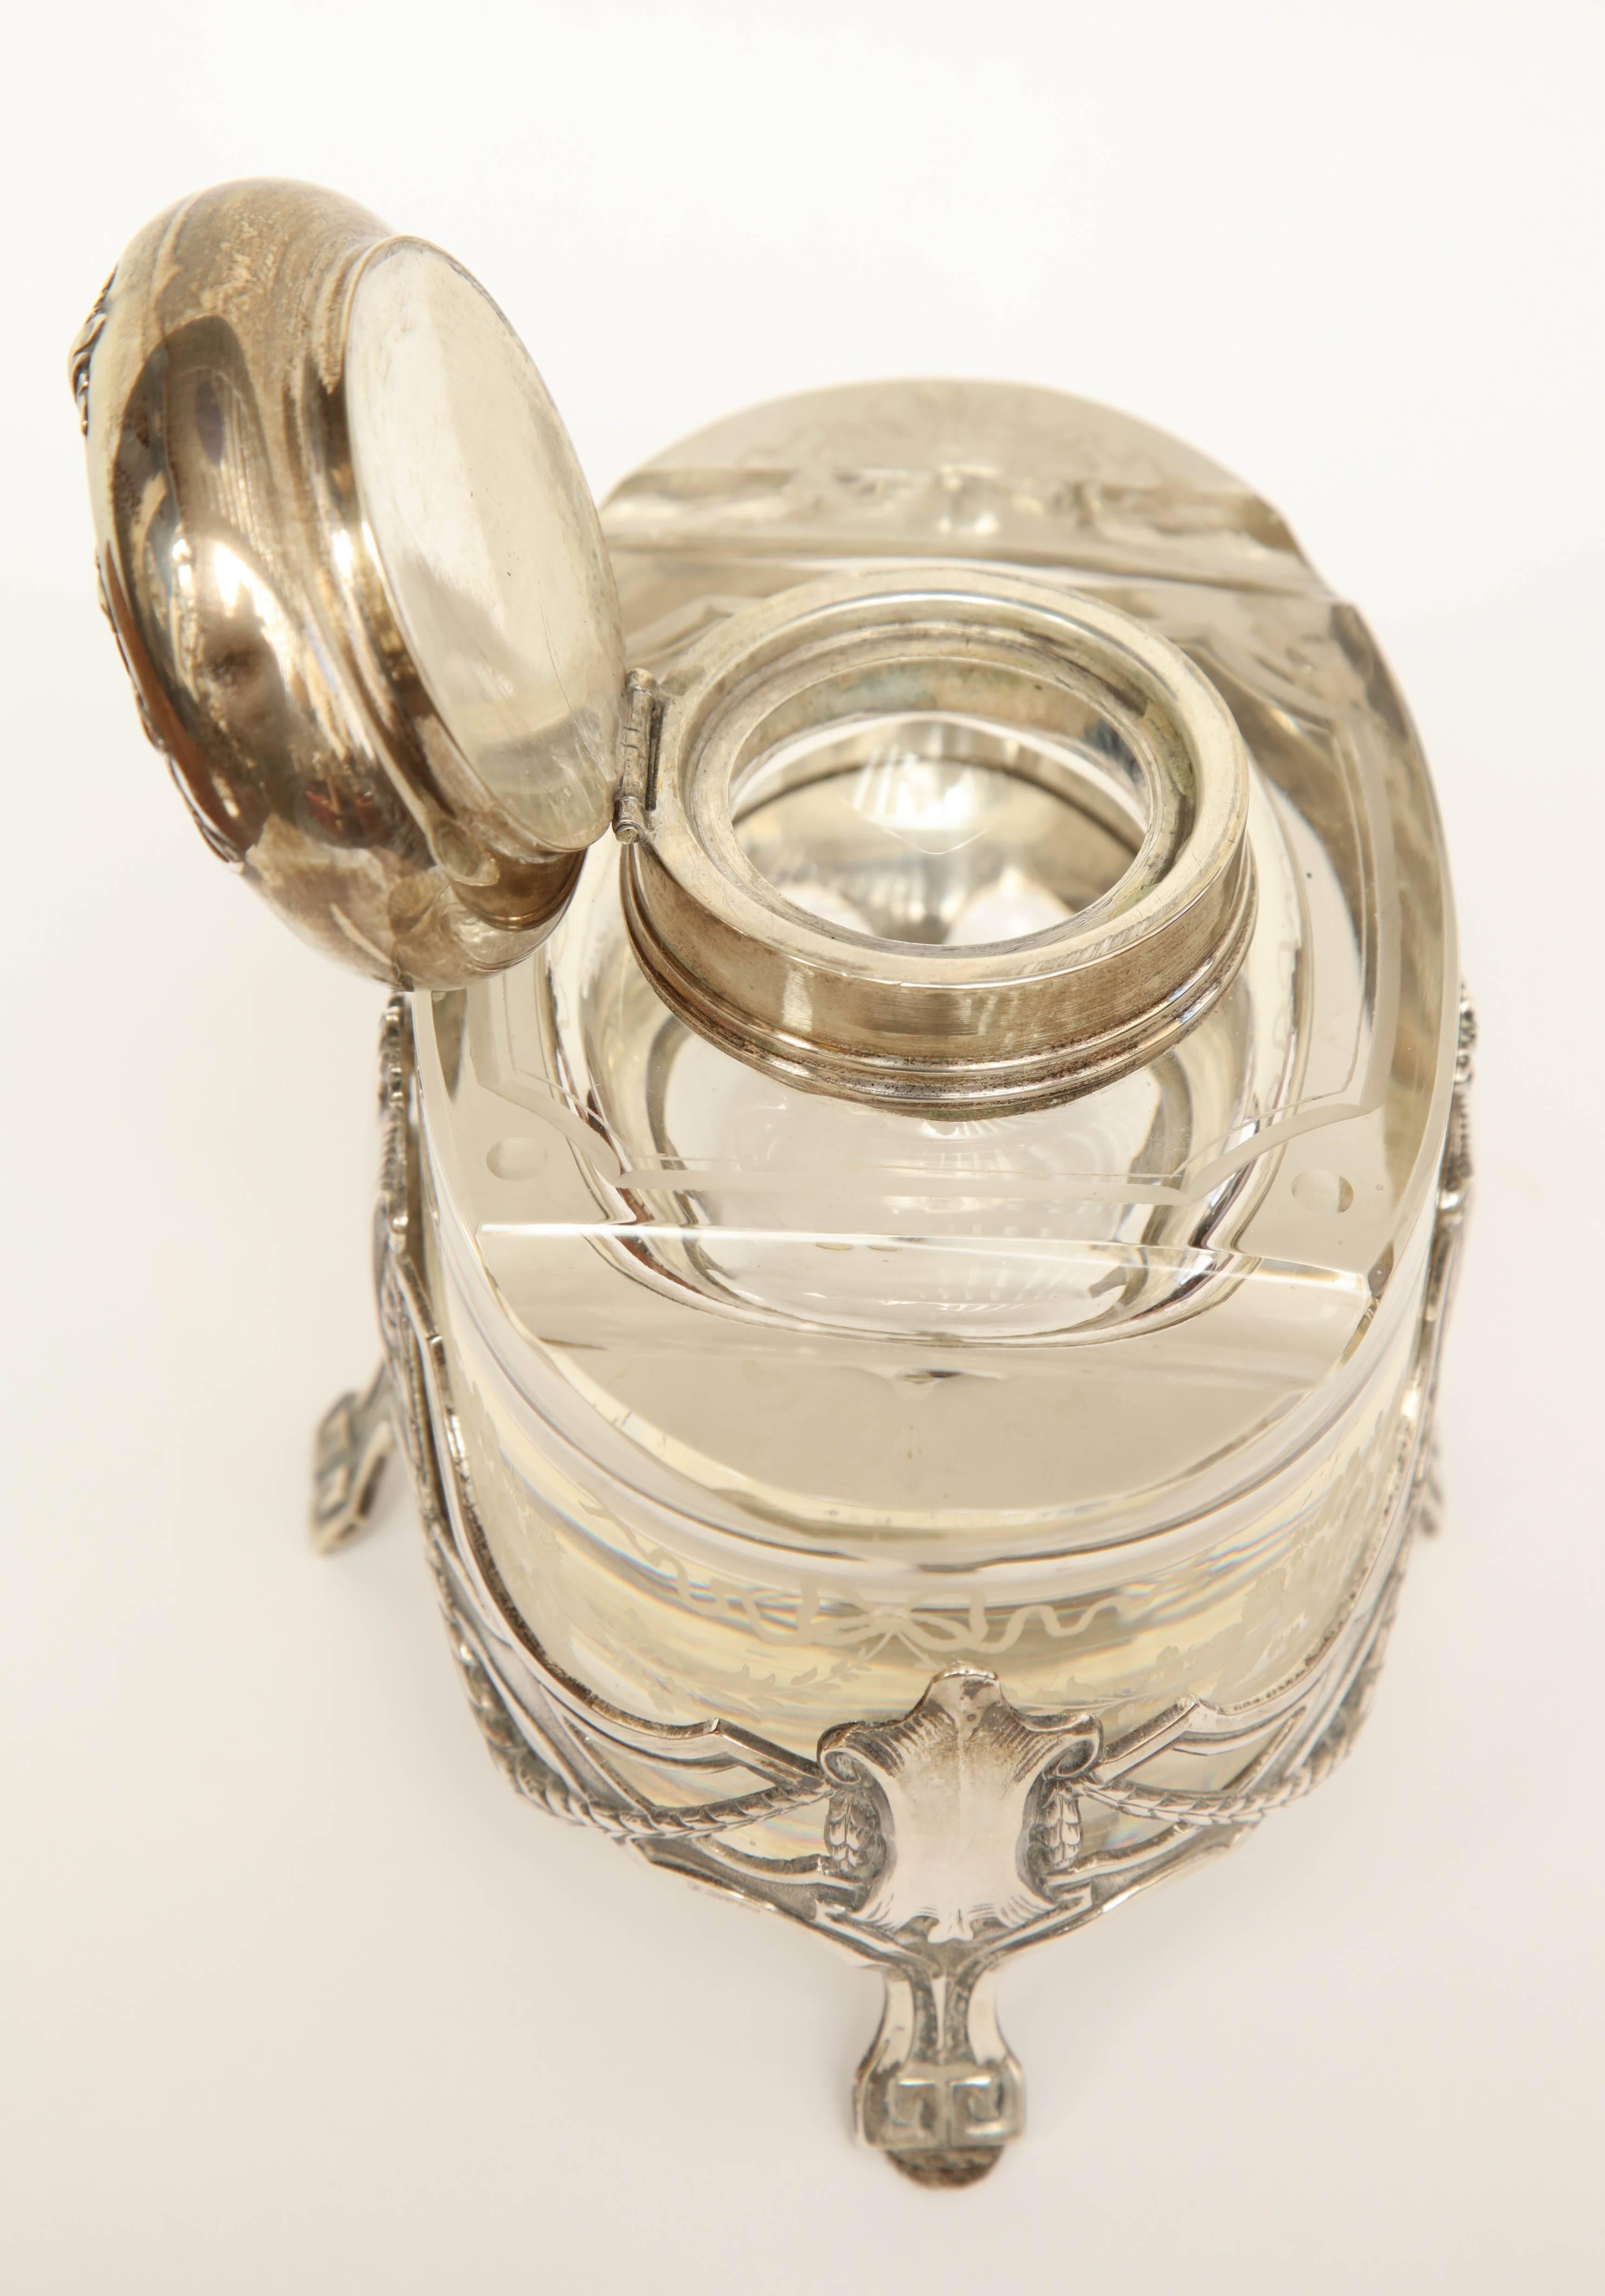 Early 20th Century Art Nouveau German Silver and Glass Inkwell For Sale 2